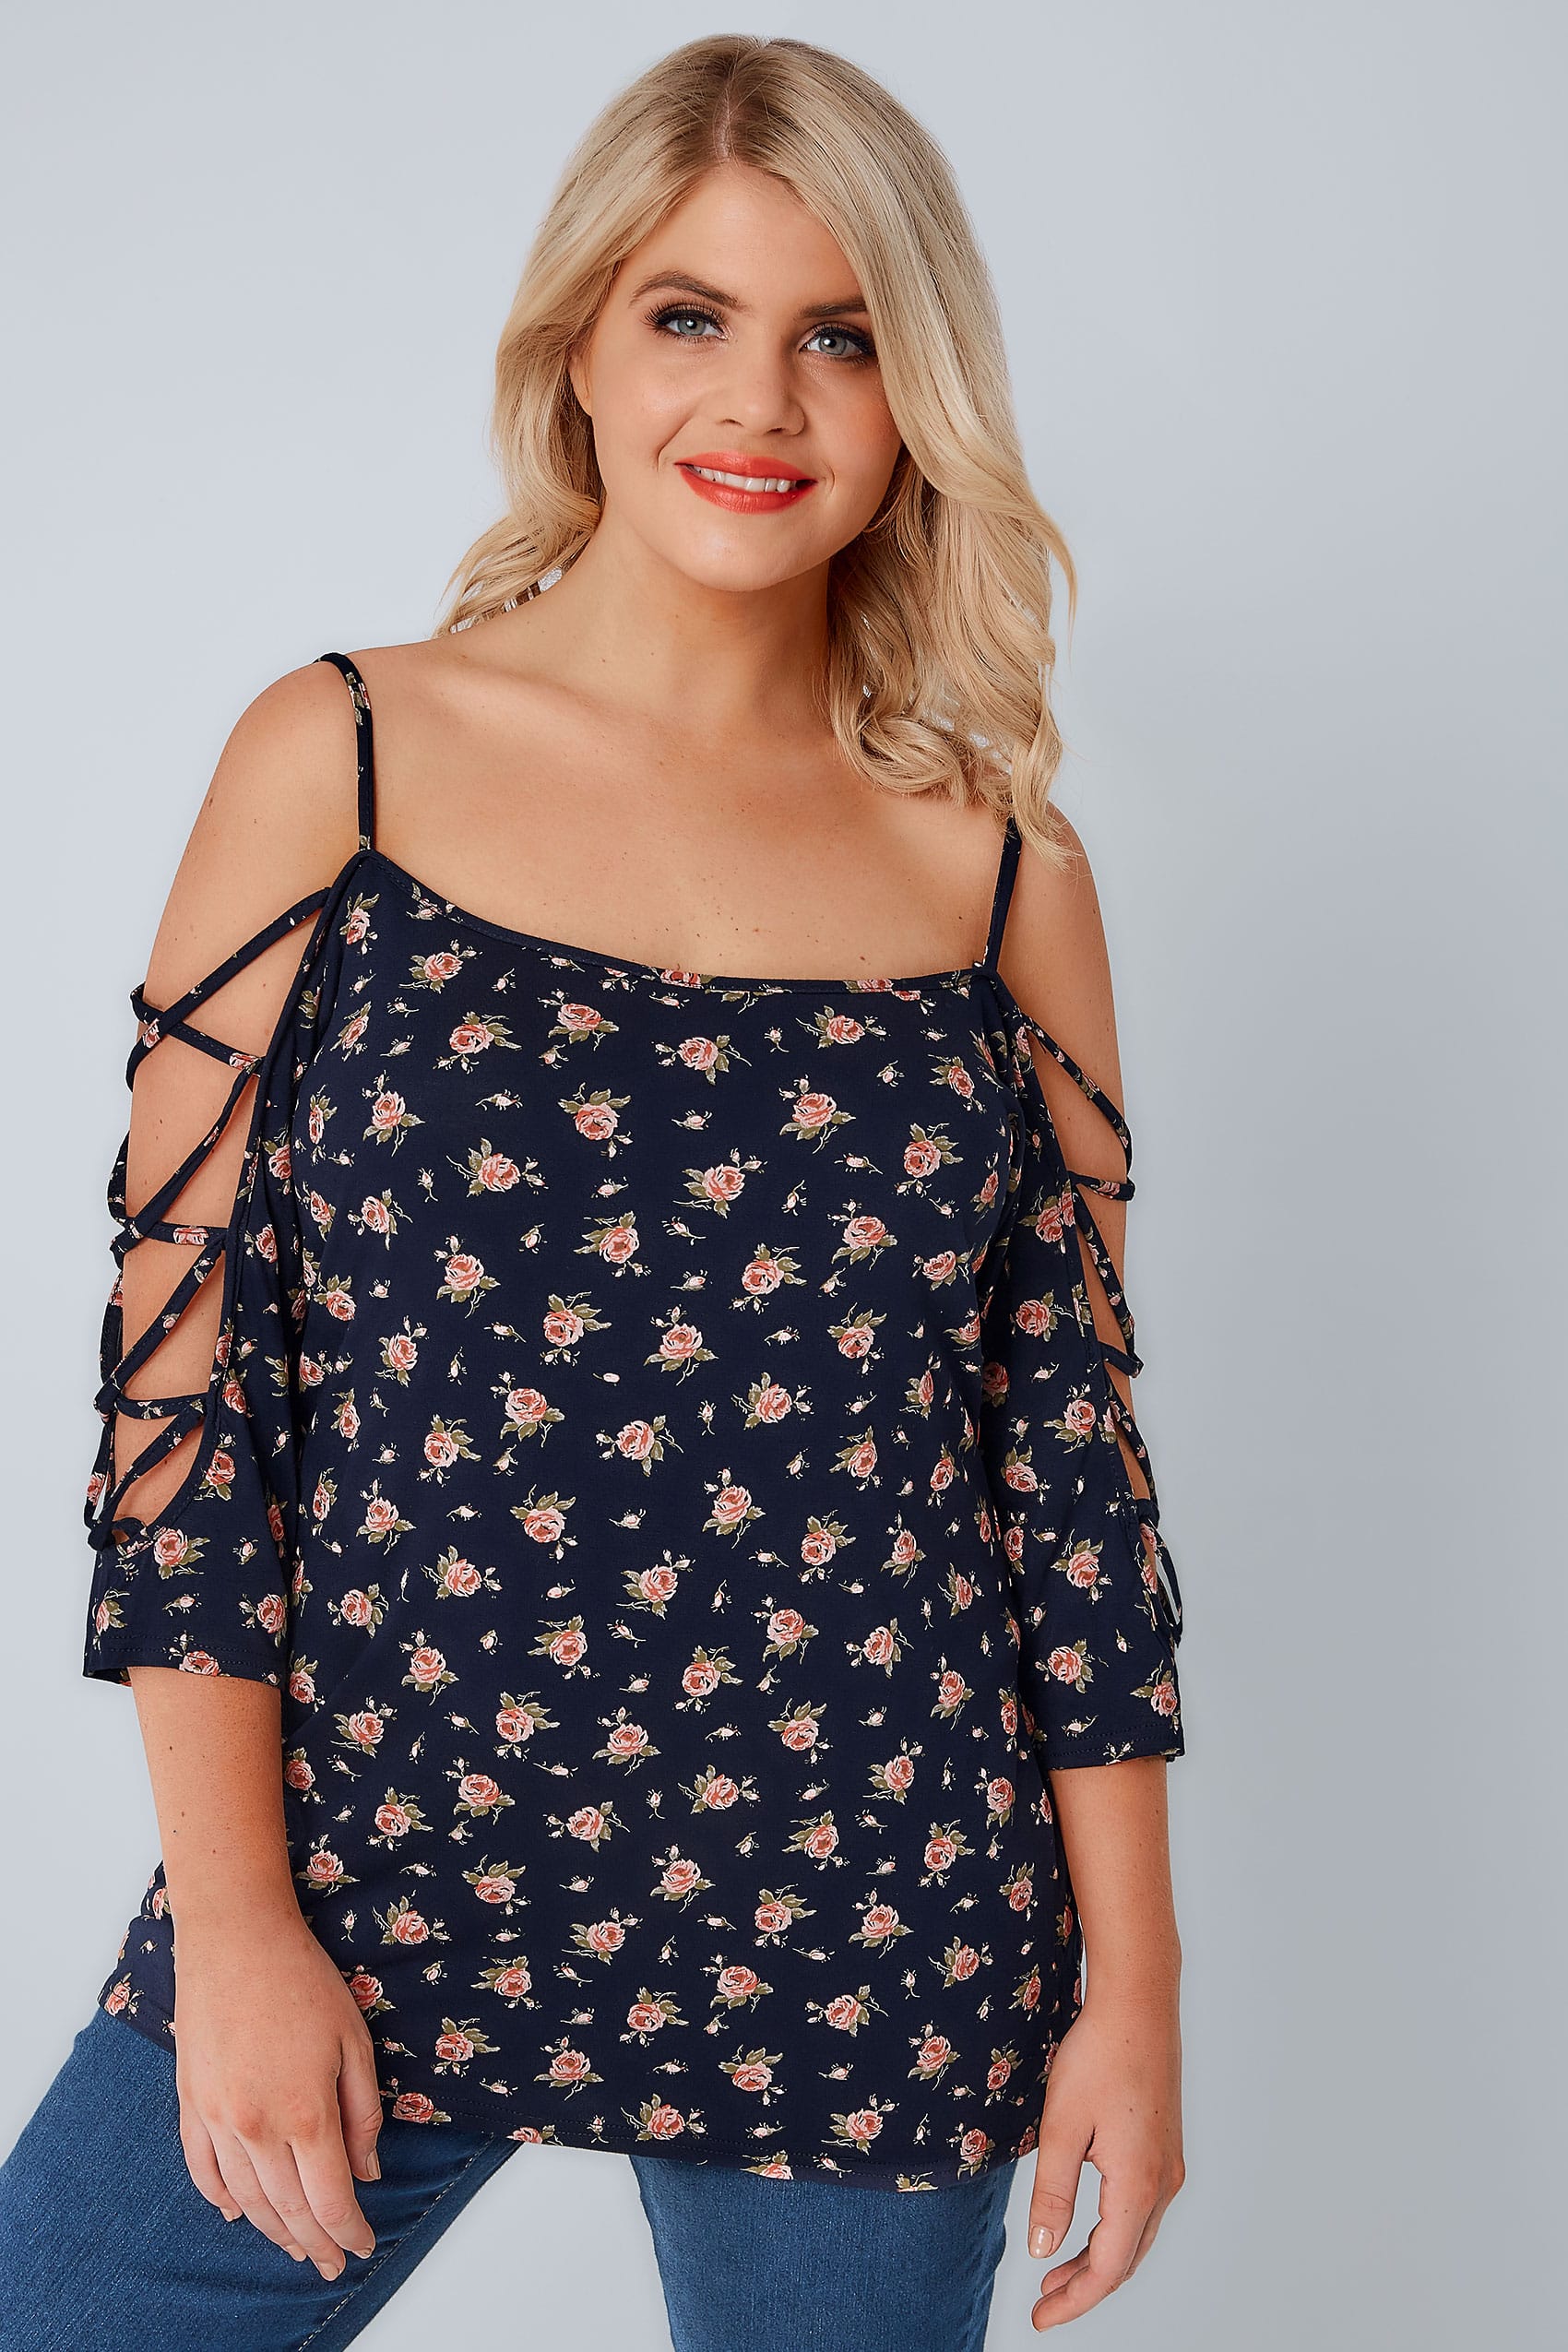 LIMITED COLLECTION Navy & Pink Floral Cami Style Top With Strappy Arm ...